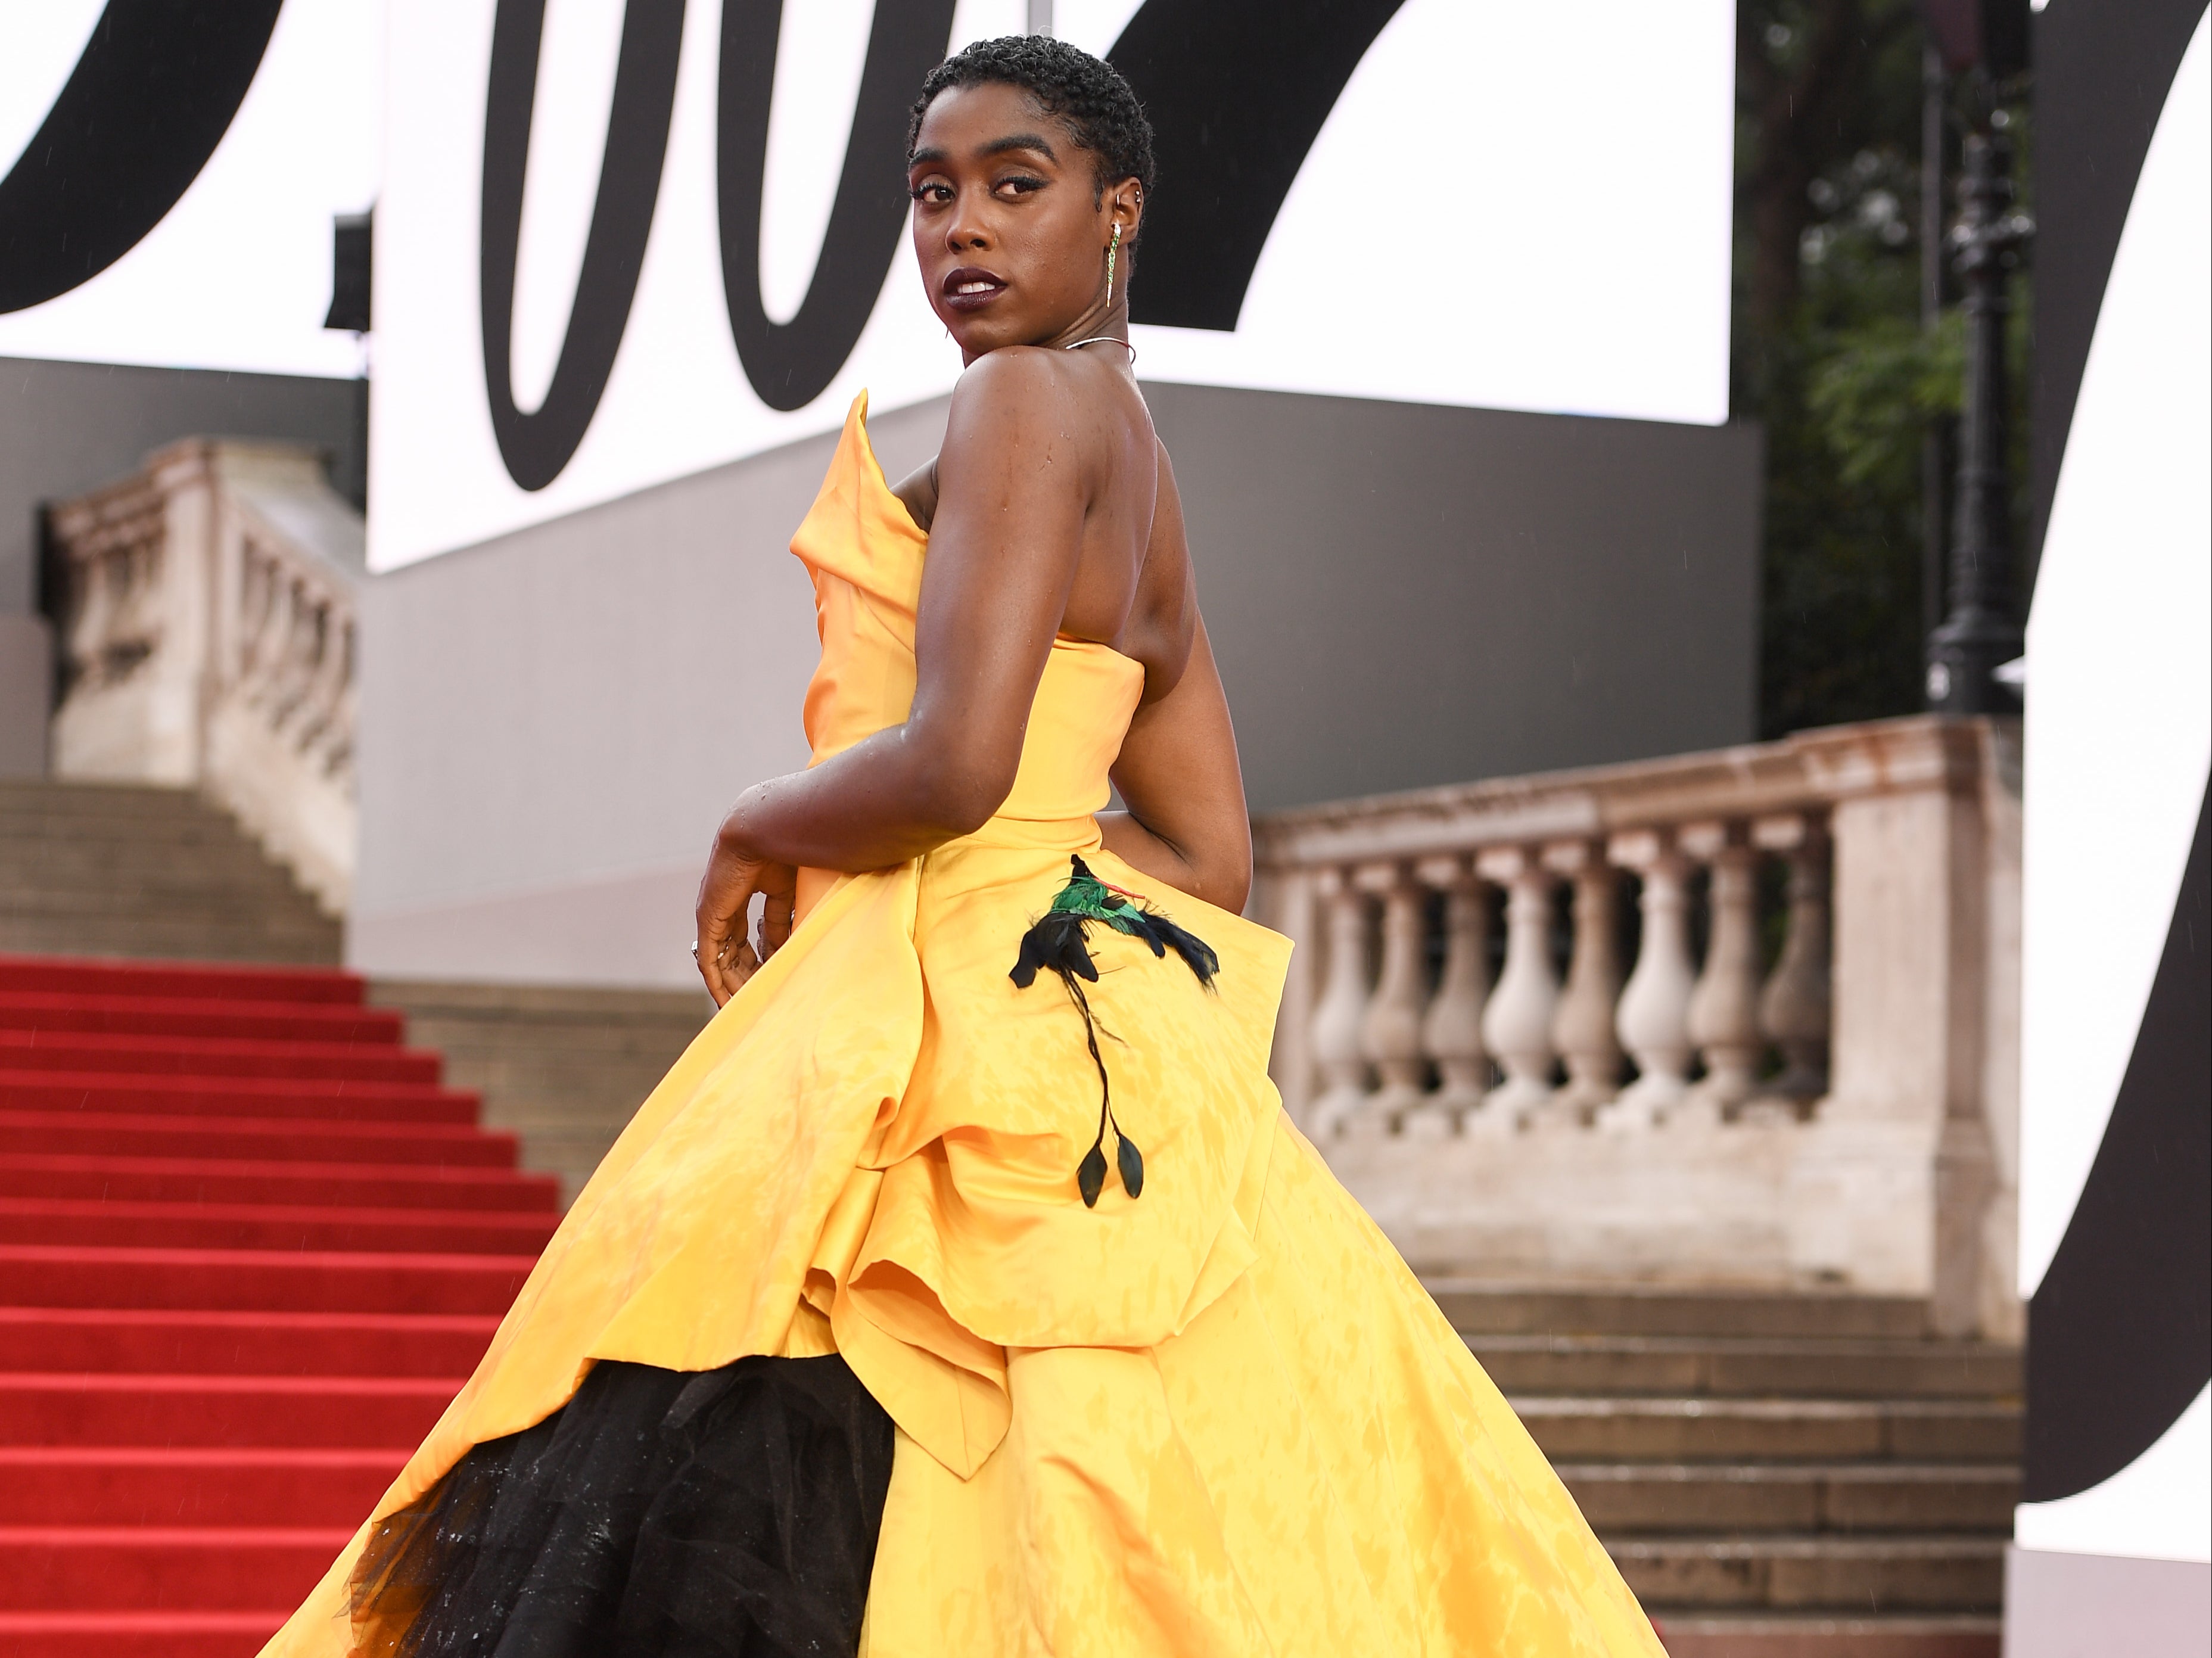 Lashana Lynch wearing Vivienne Westwood at the world premiere of No Time to Die in September 2021